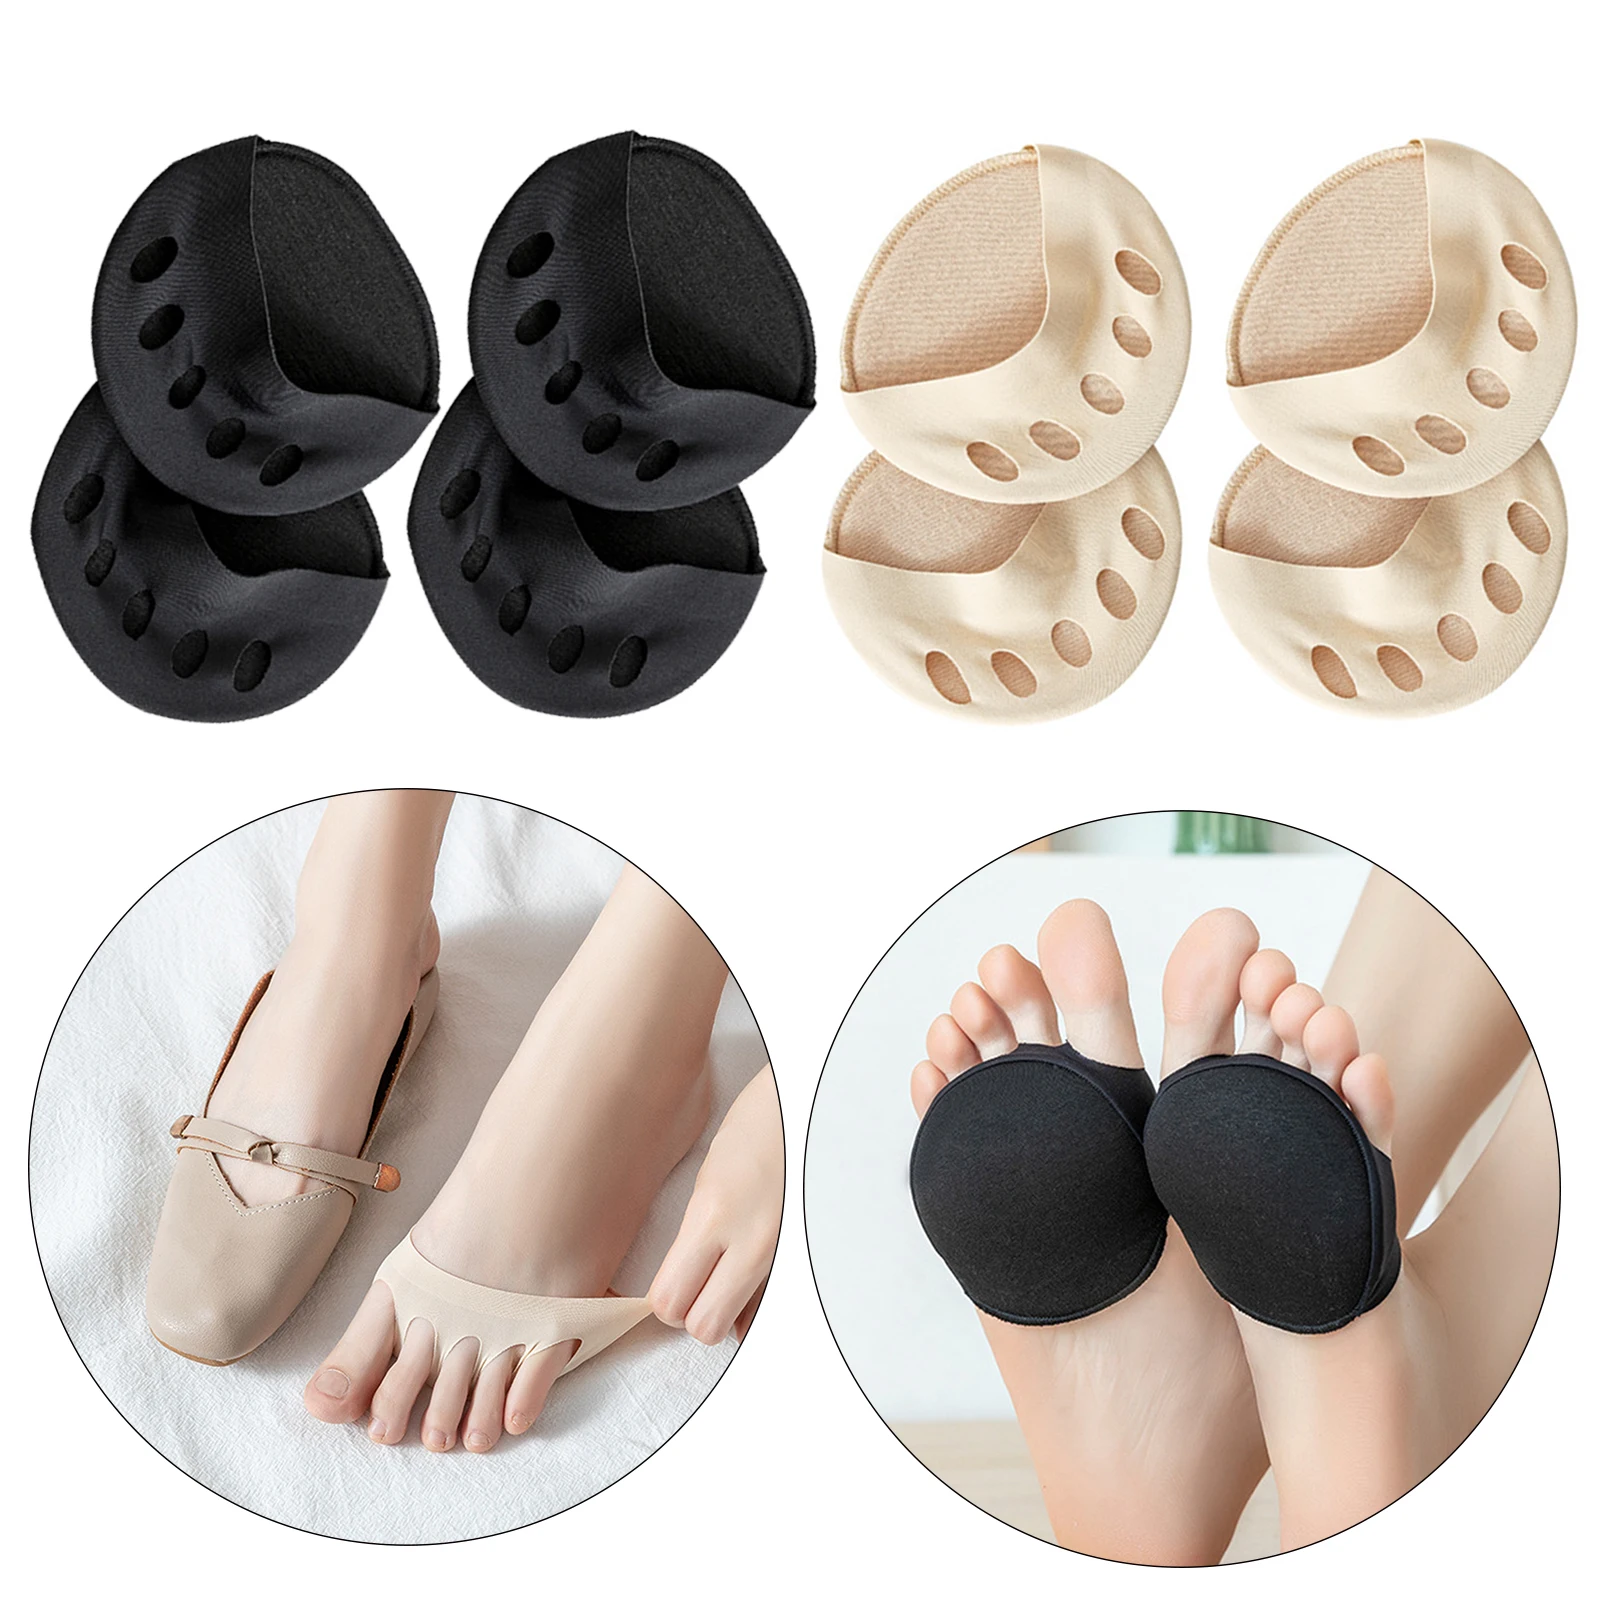 2Pair Metatarsal Pads Cotton Hig Heels Ball of Foot Cushions Pain Soft Insoles Forefoot Care Support Protector